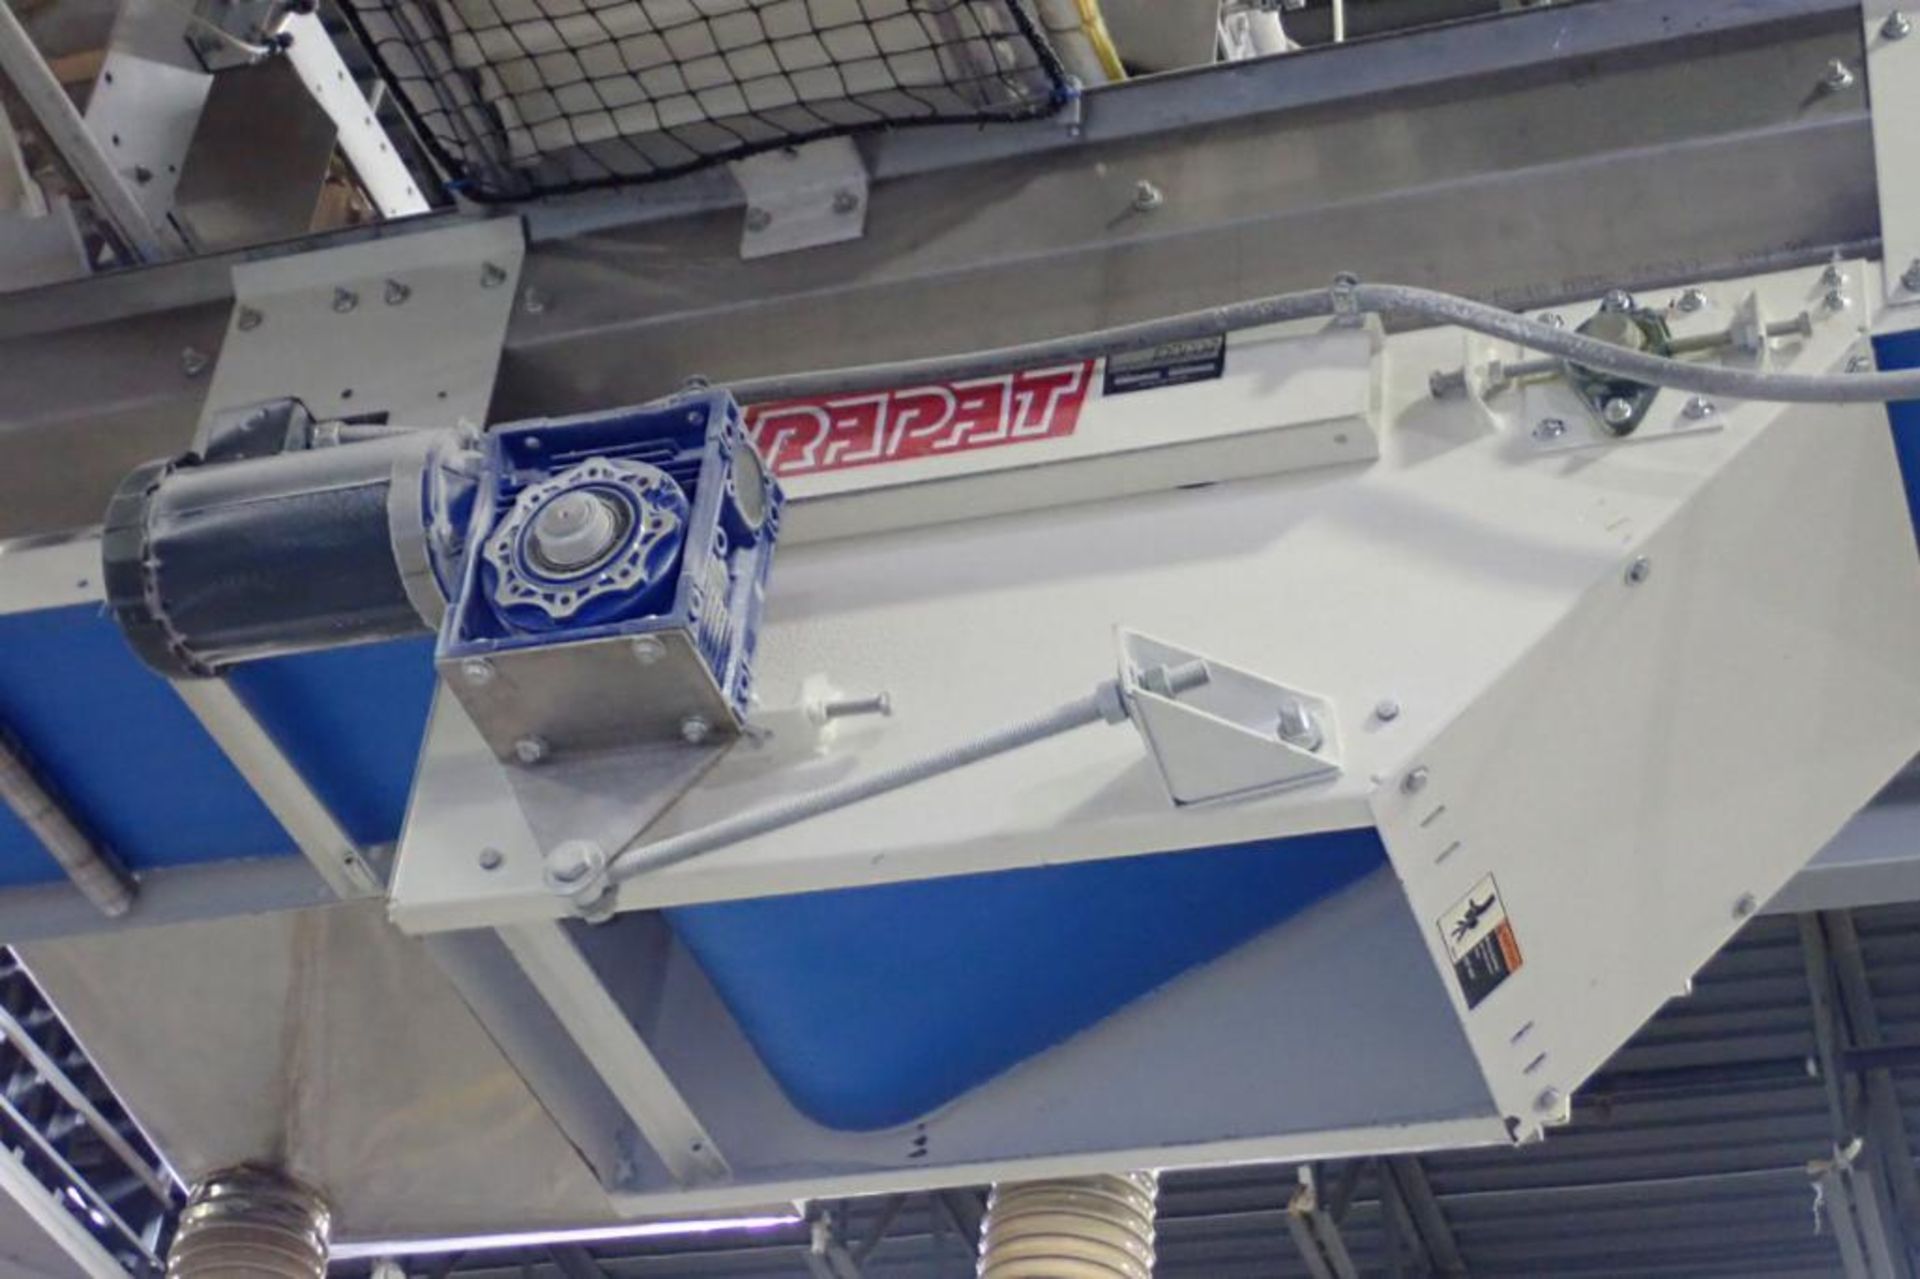 Rapat infeed conveyor, 20 ft. long x 24 in. wide, blue belt, motor and drive, suspended from ceiling - Bild 2 aus 4